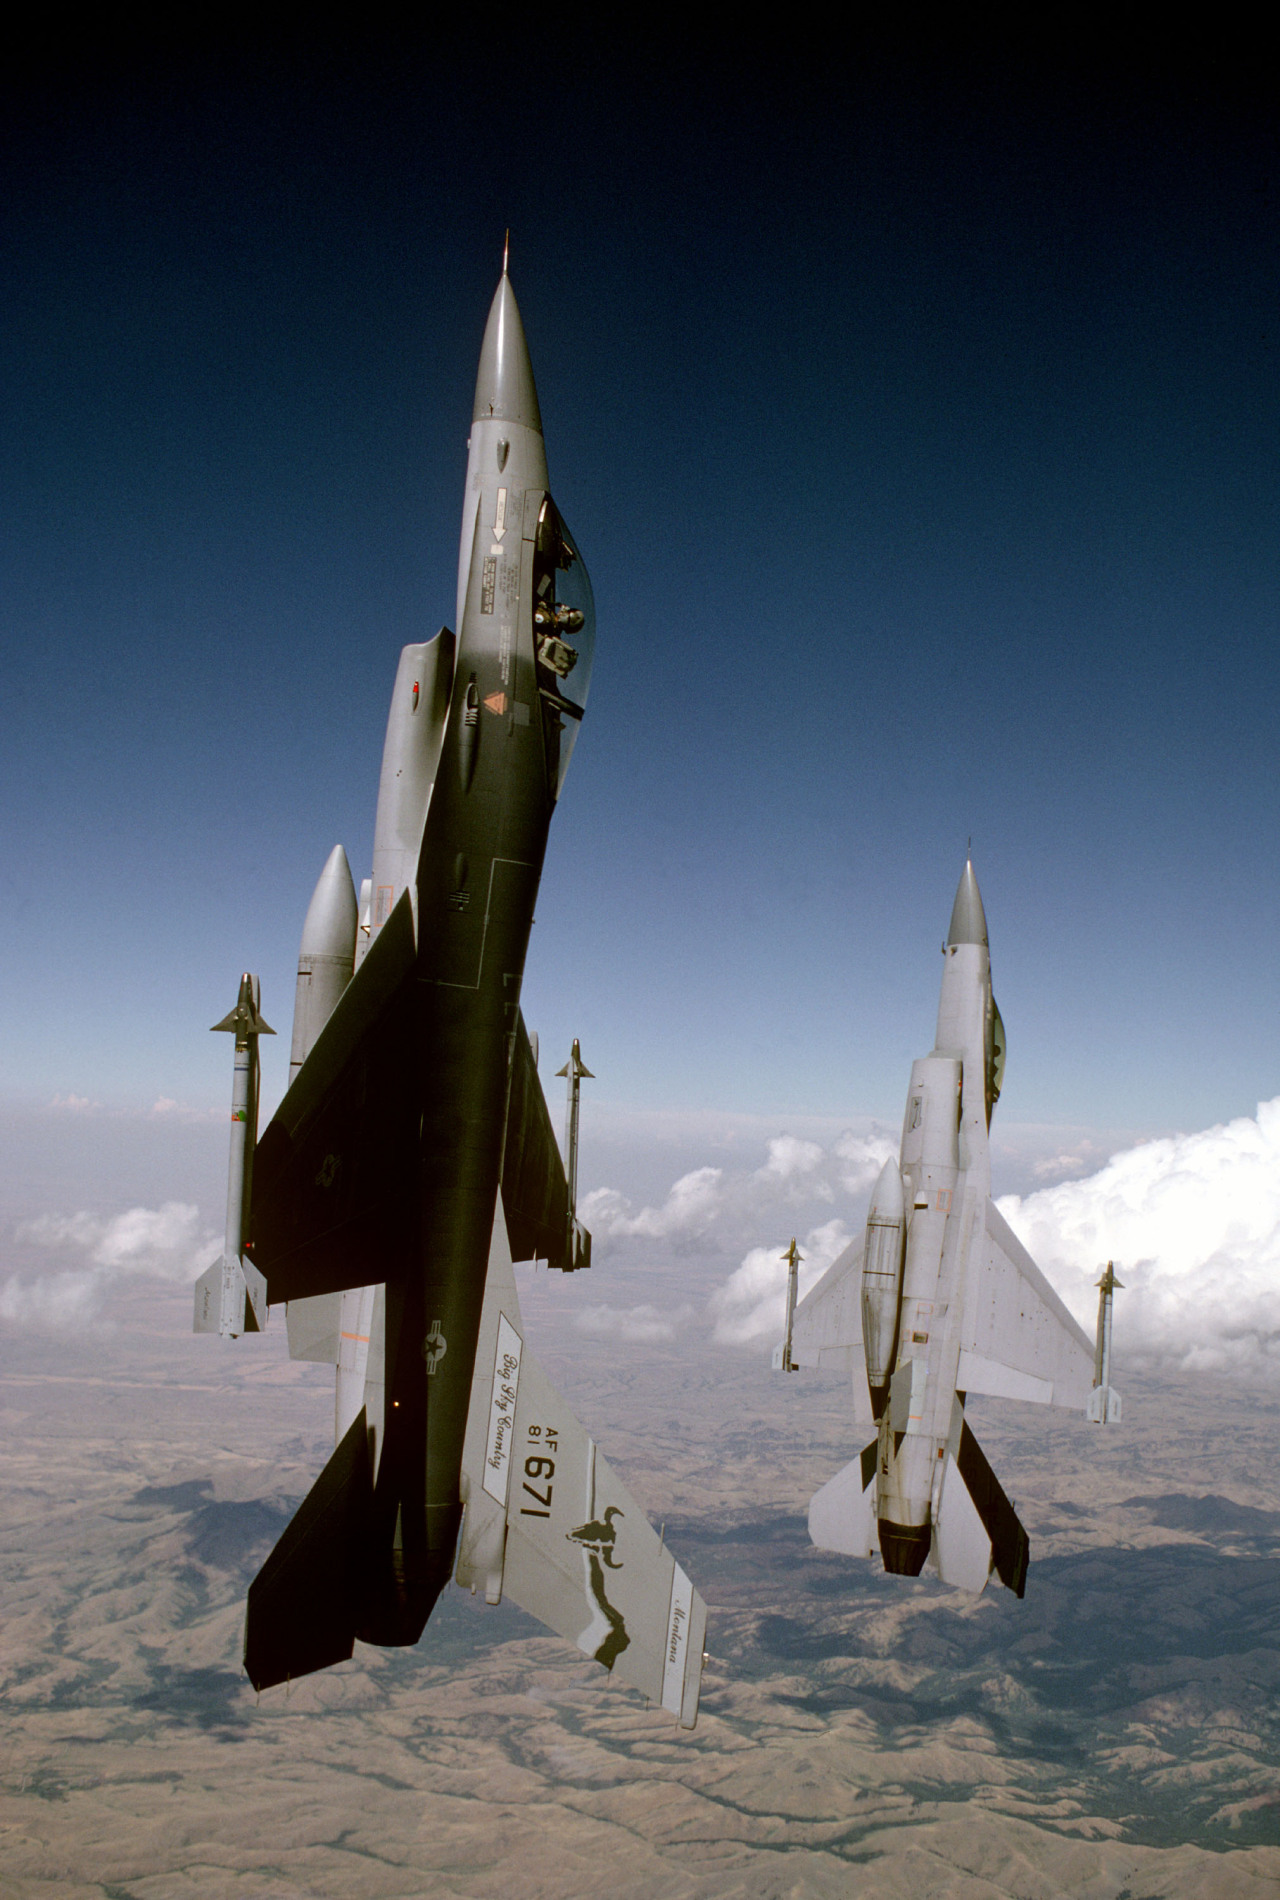 flying-fortress:  Armed with AIM-9 Sidewinder missiles, a pair of F-16A Fighting